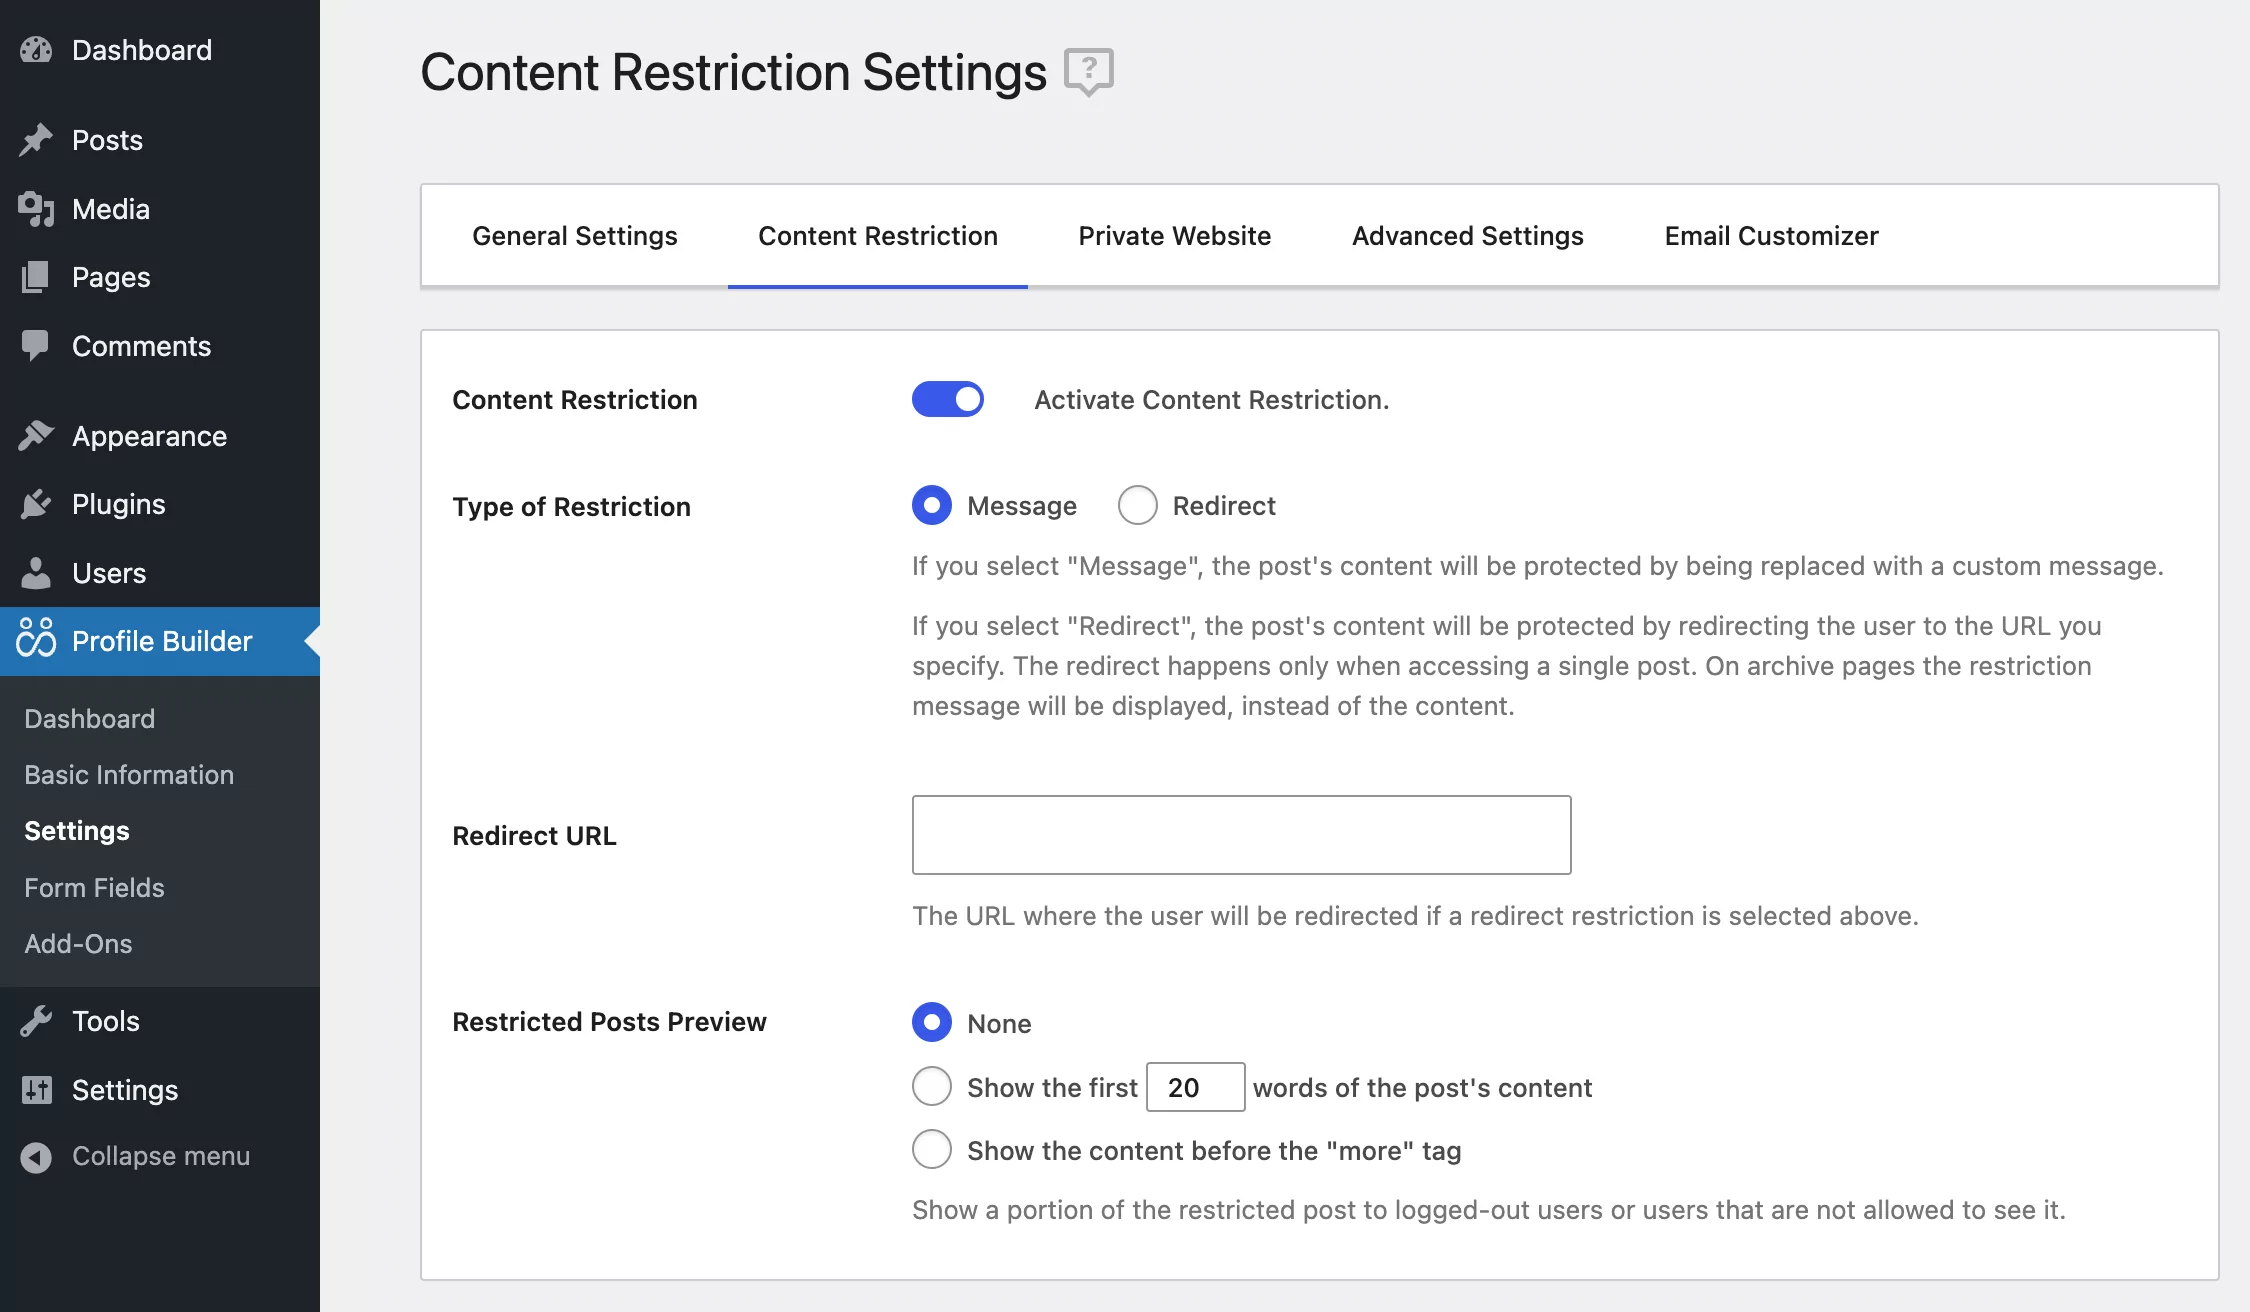 Enabling Content Restriction in WordPress to password protect content